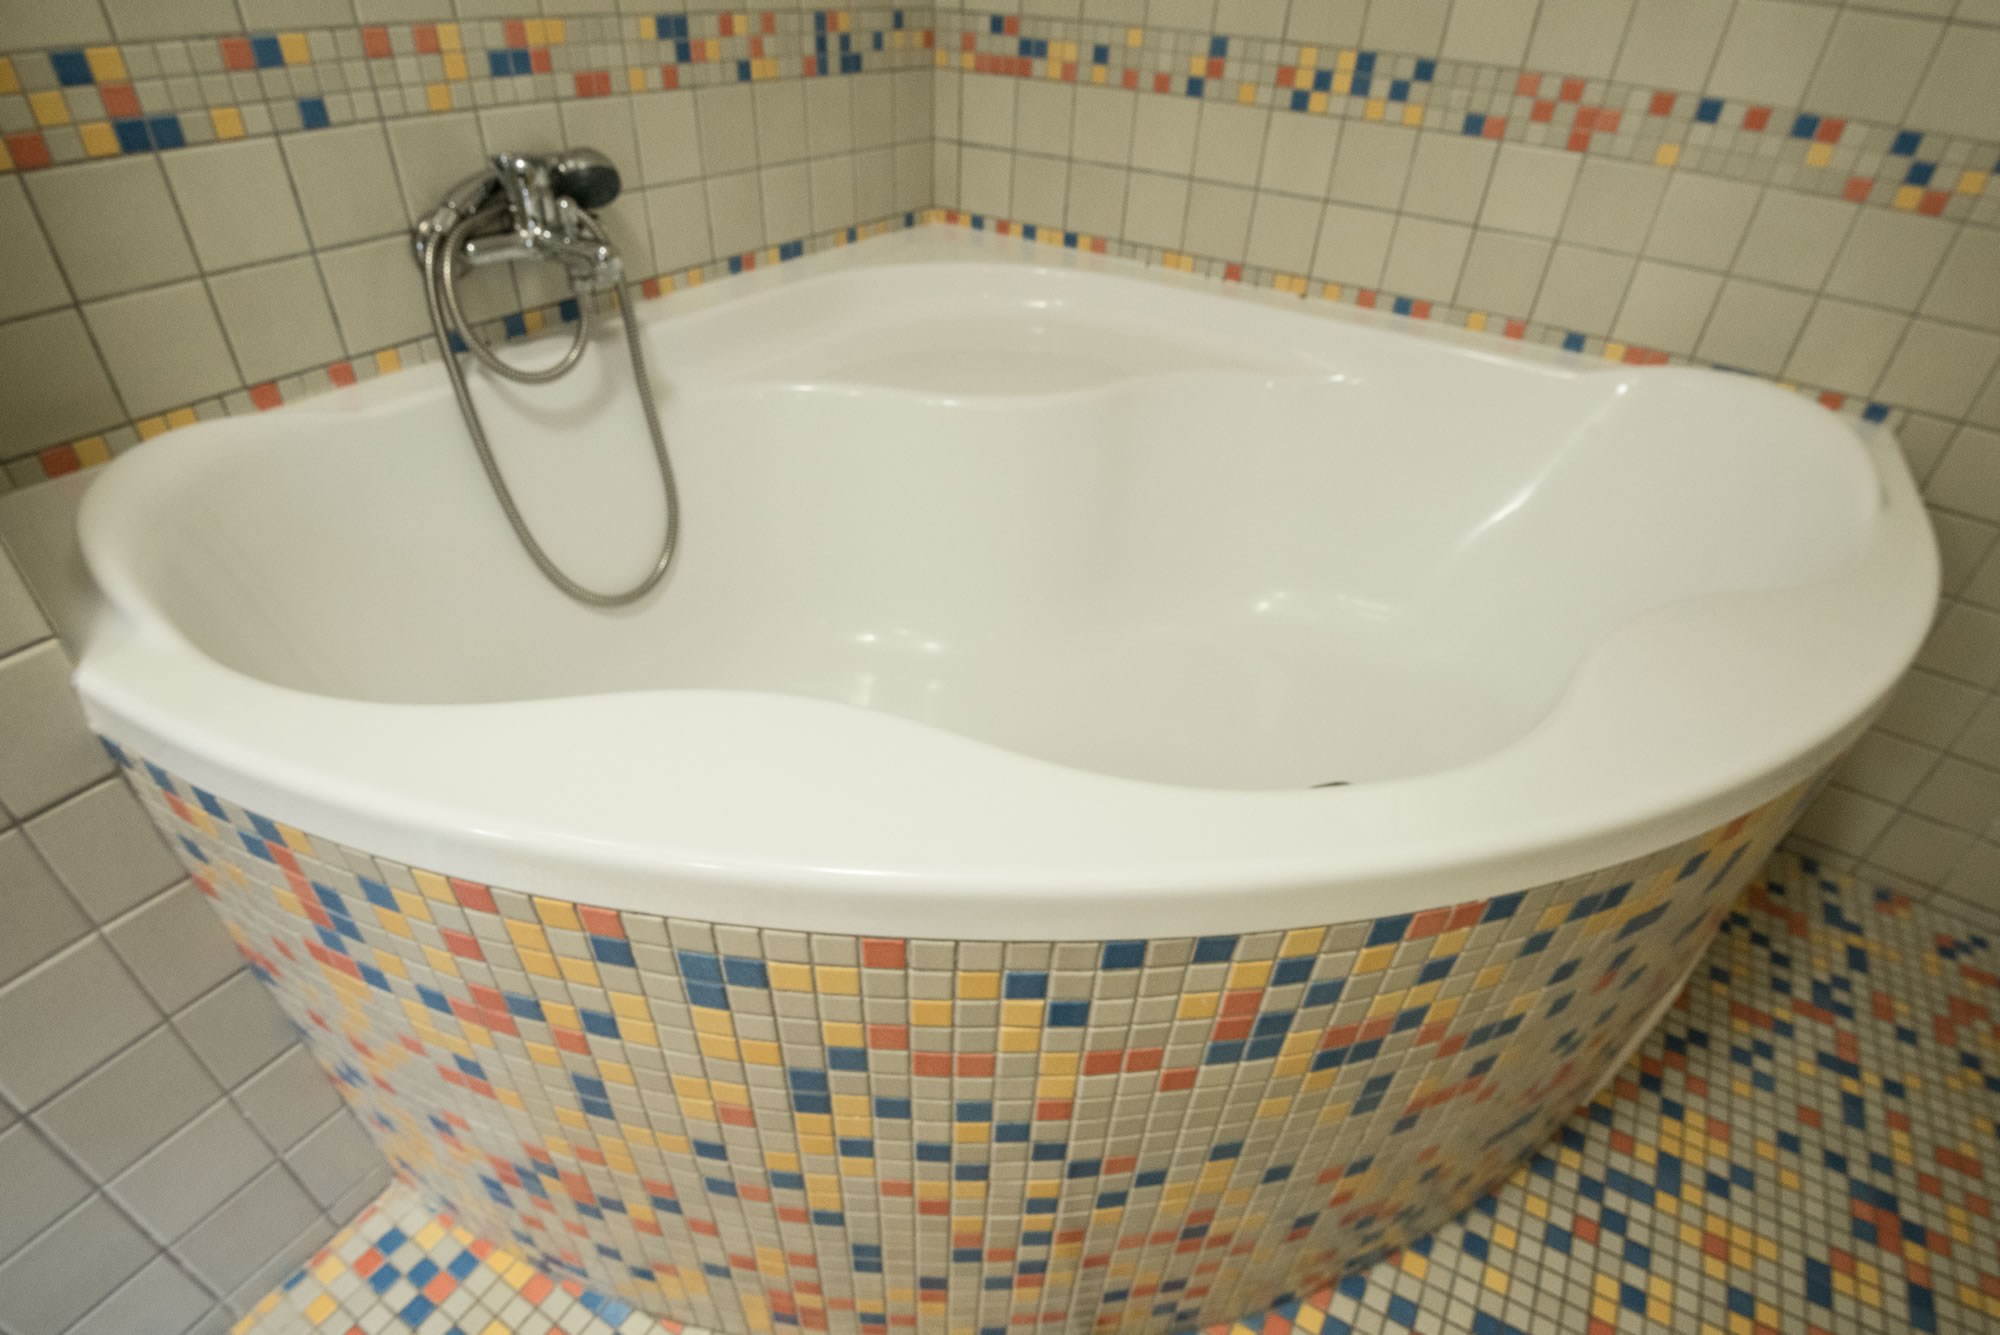 Bath tube covered by colored tiles